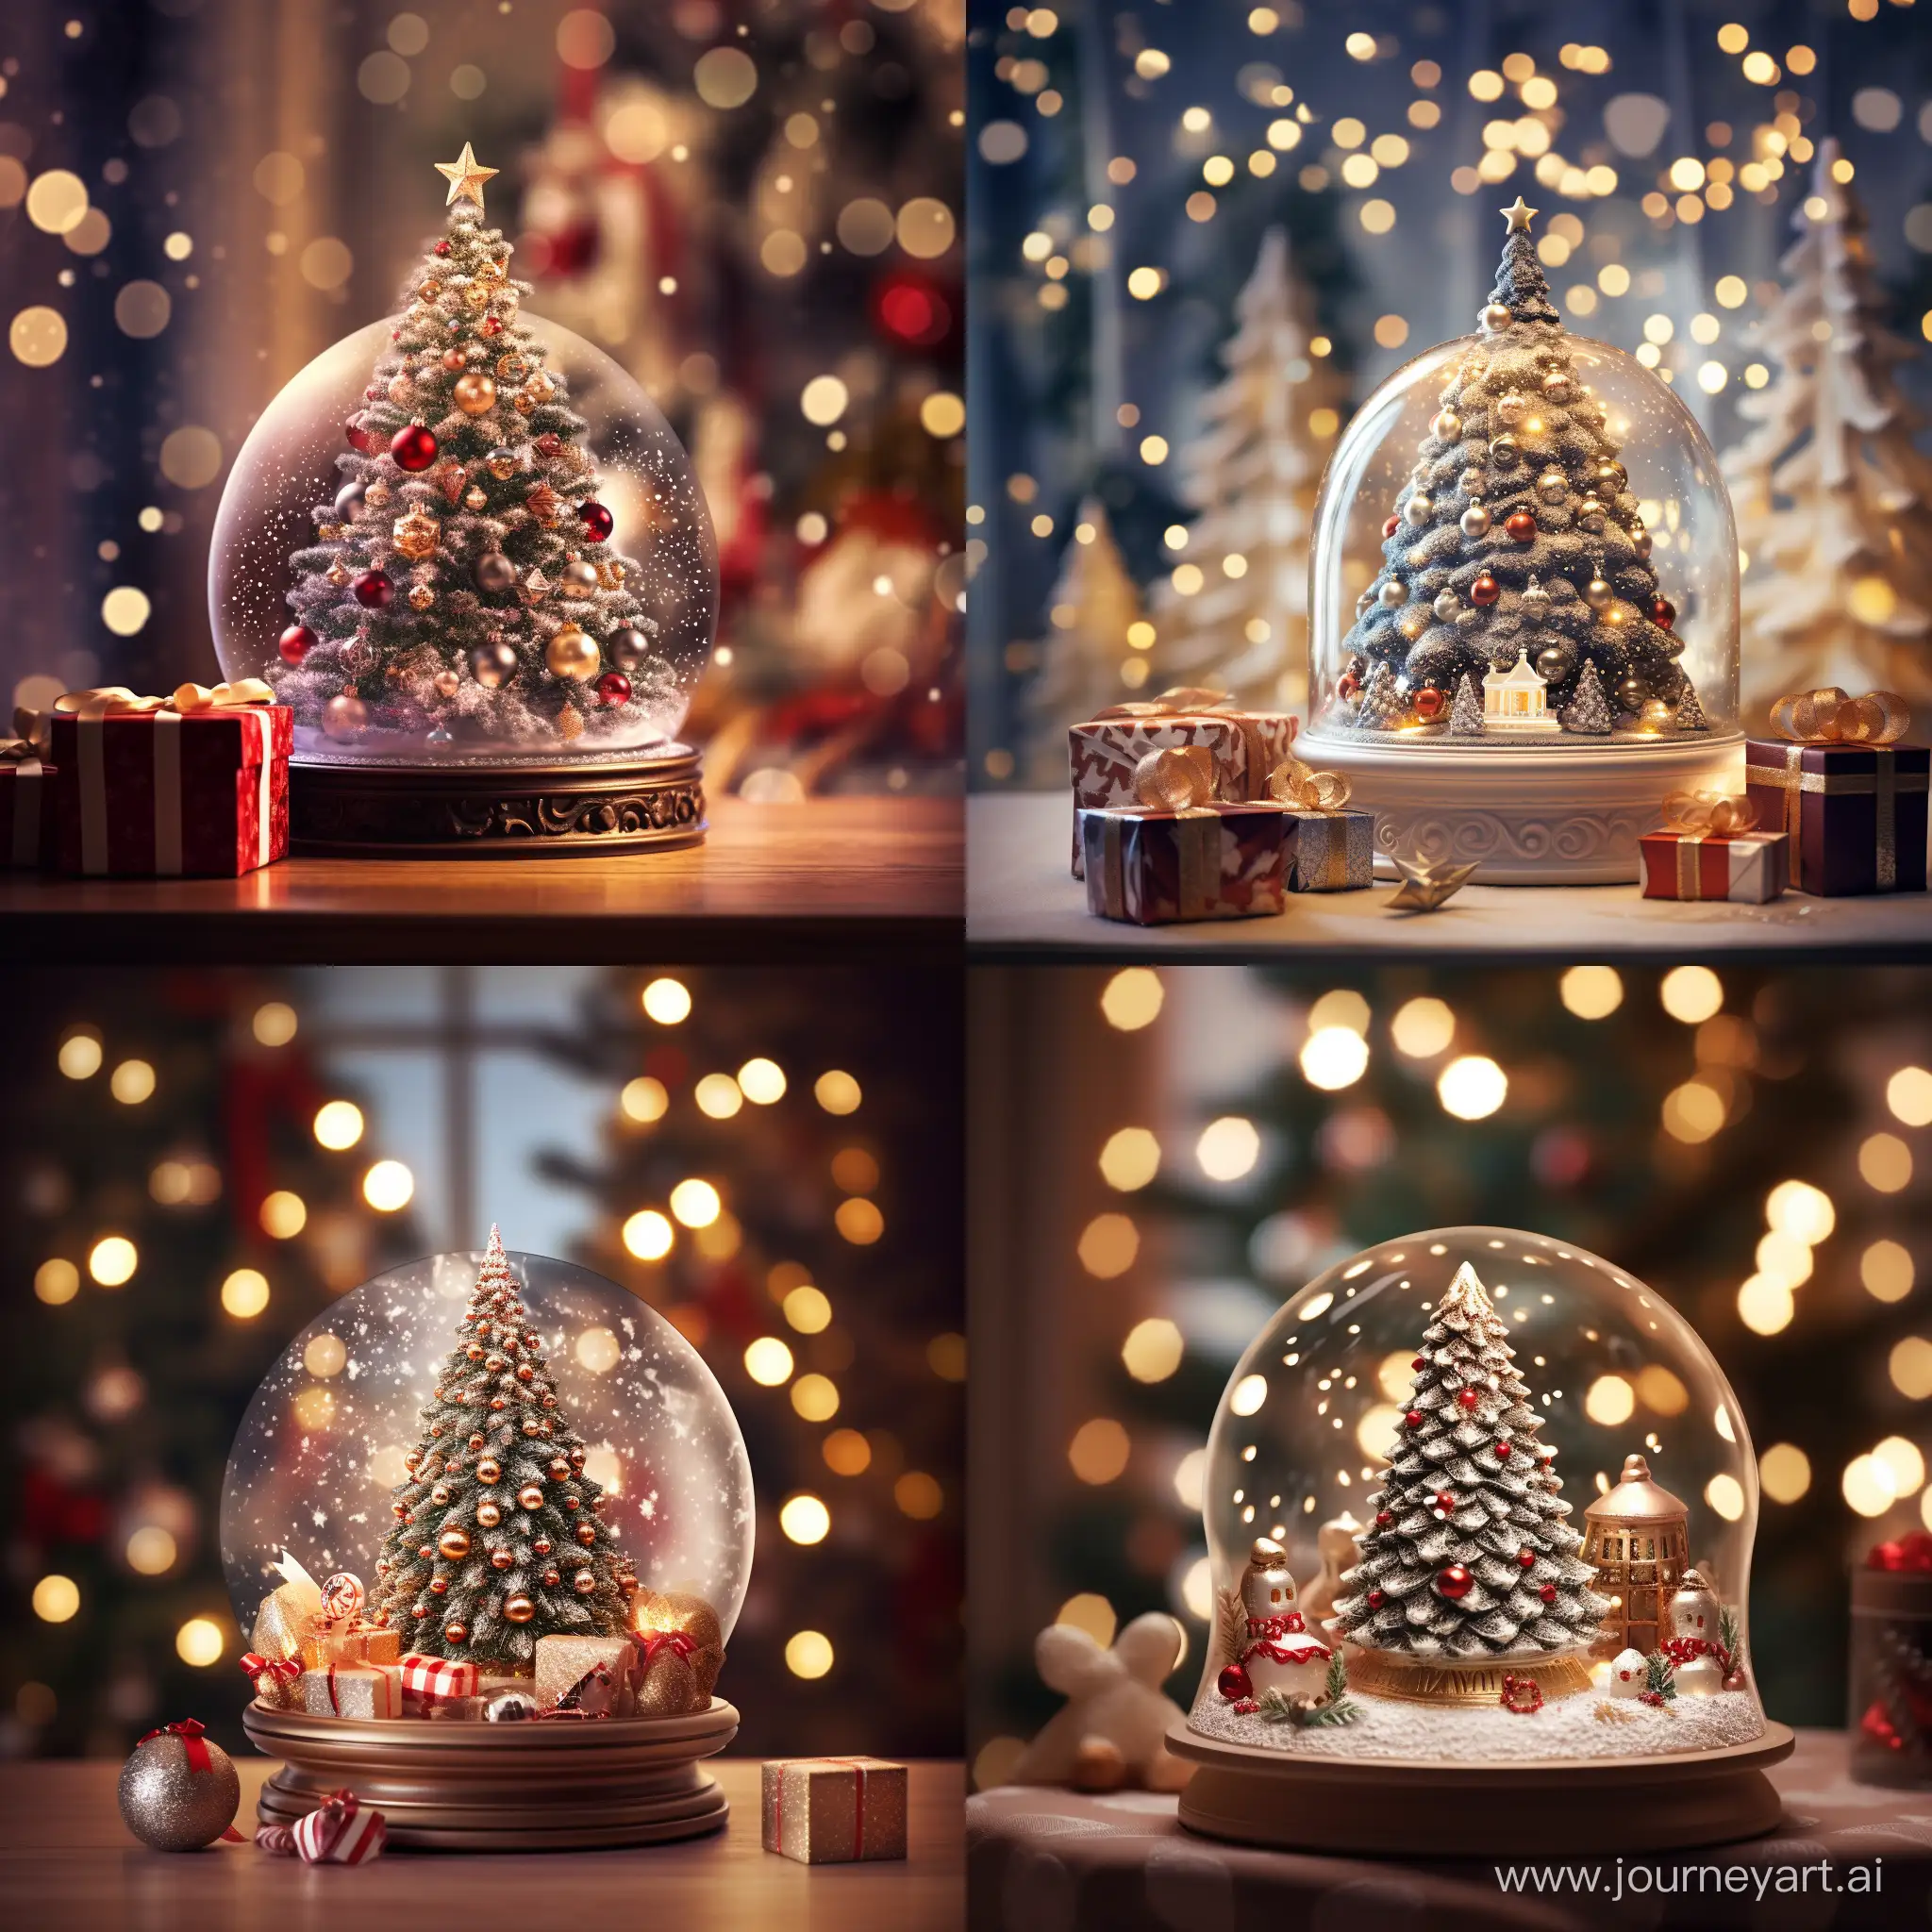 photograph of a snow globe with detailed Christmas tree and presents inside motif, set against a softly blurred Cristmas room background